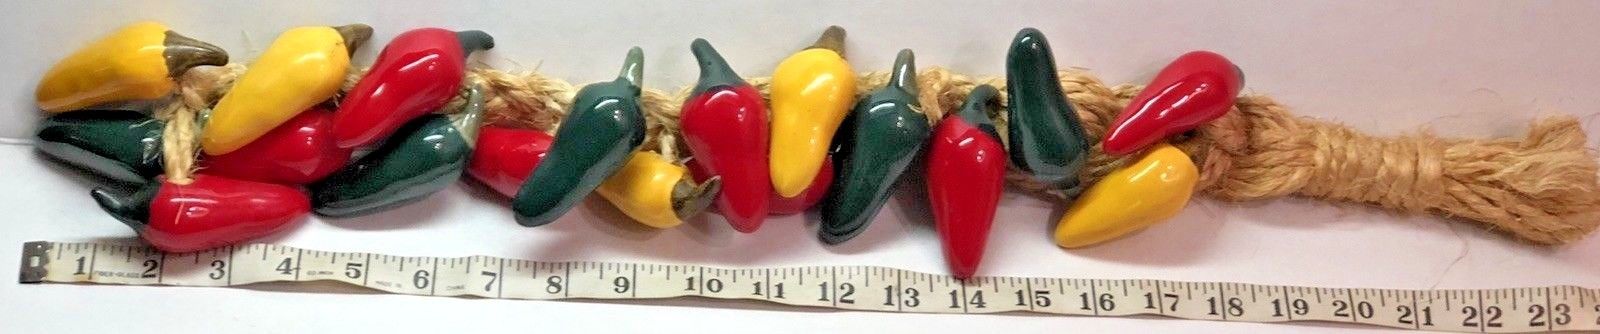 Long Braided Rope Ceramic Peppers Mexican Decor 24” Wall Hanging 18 peppers*